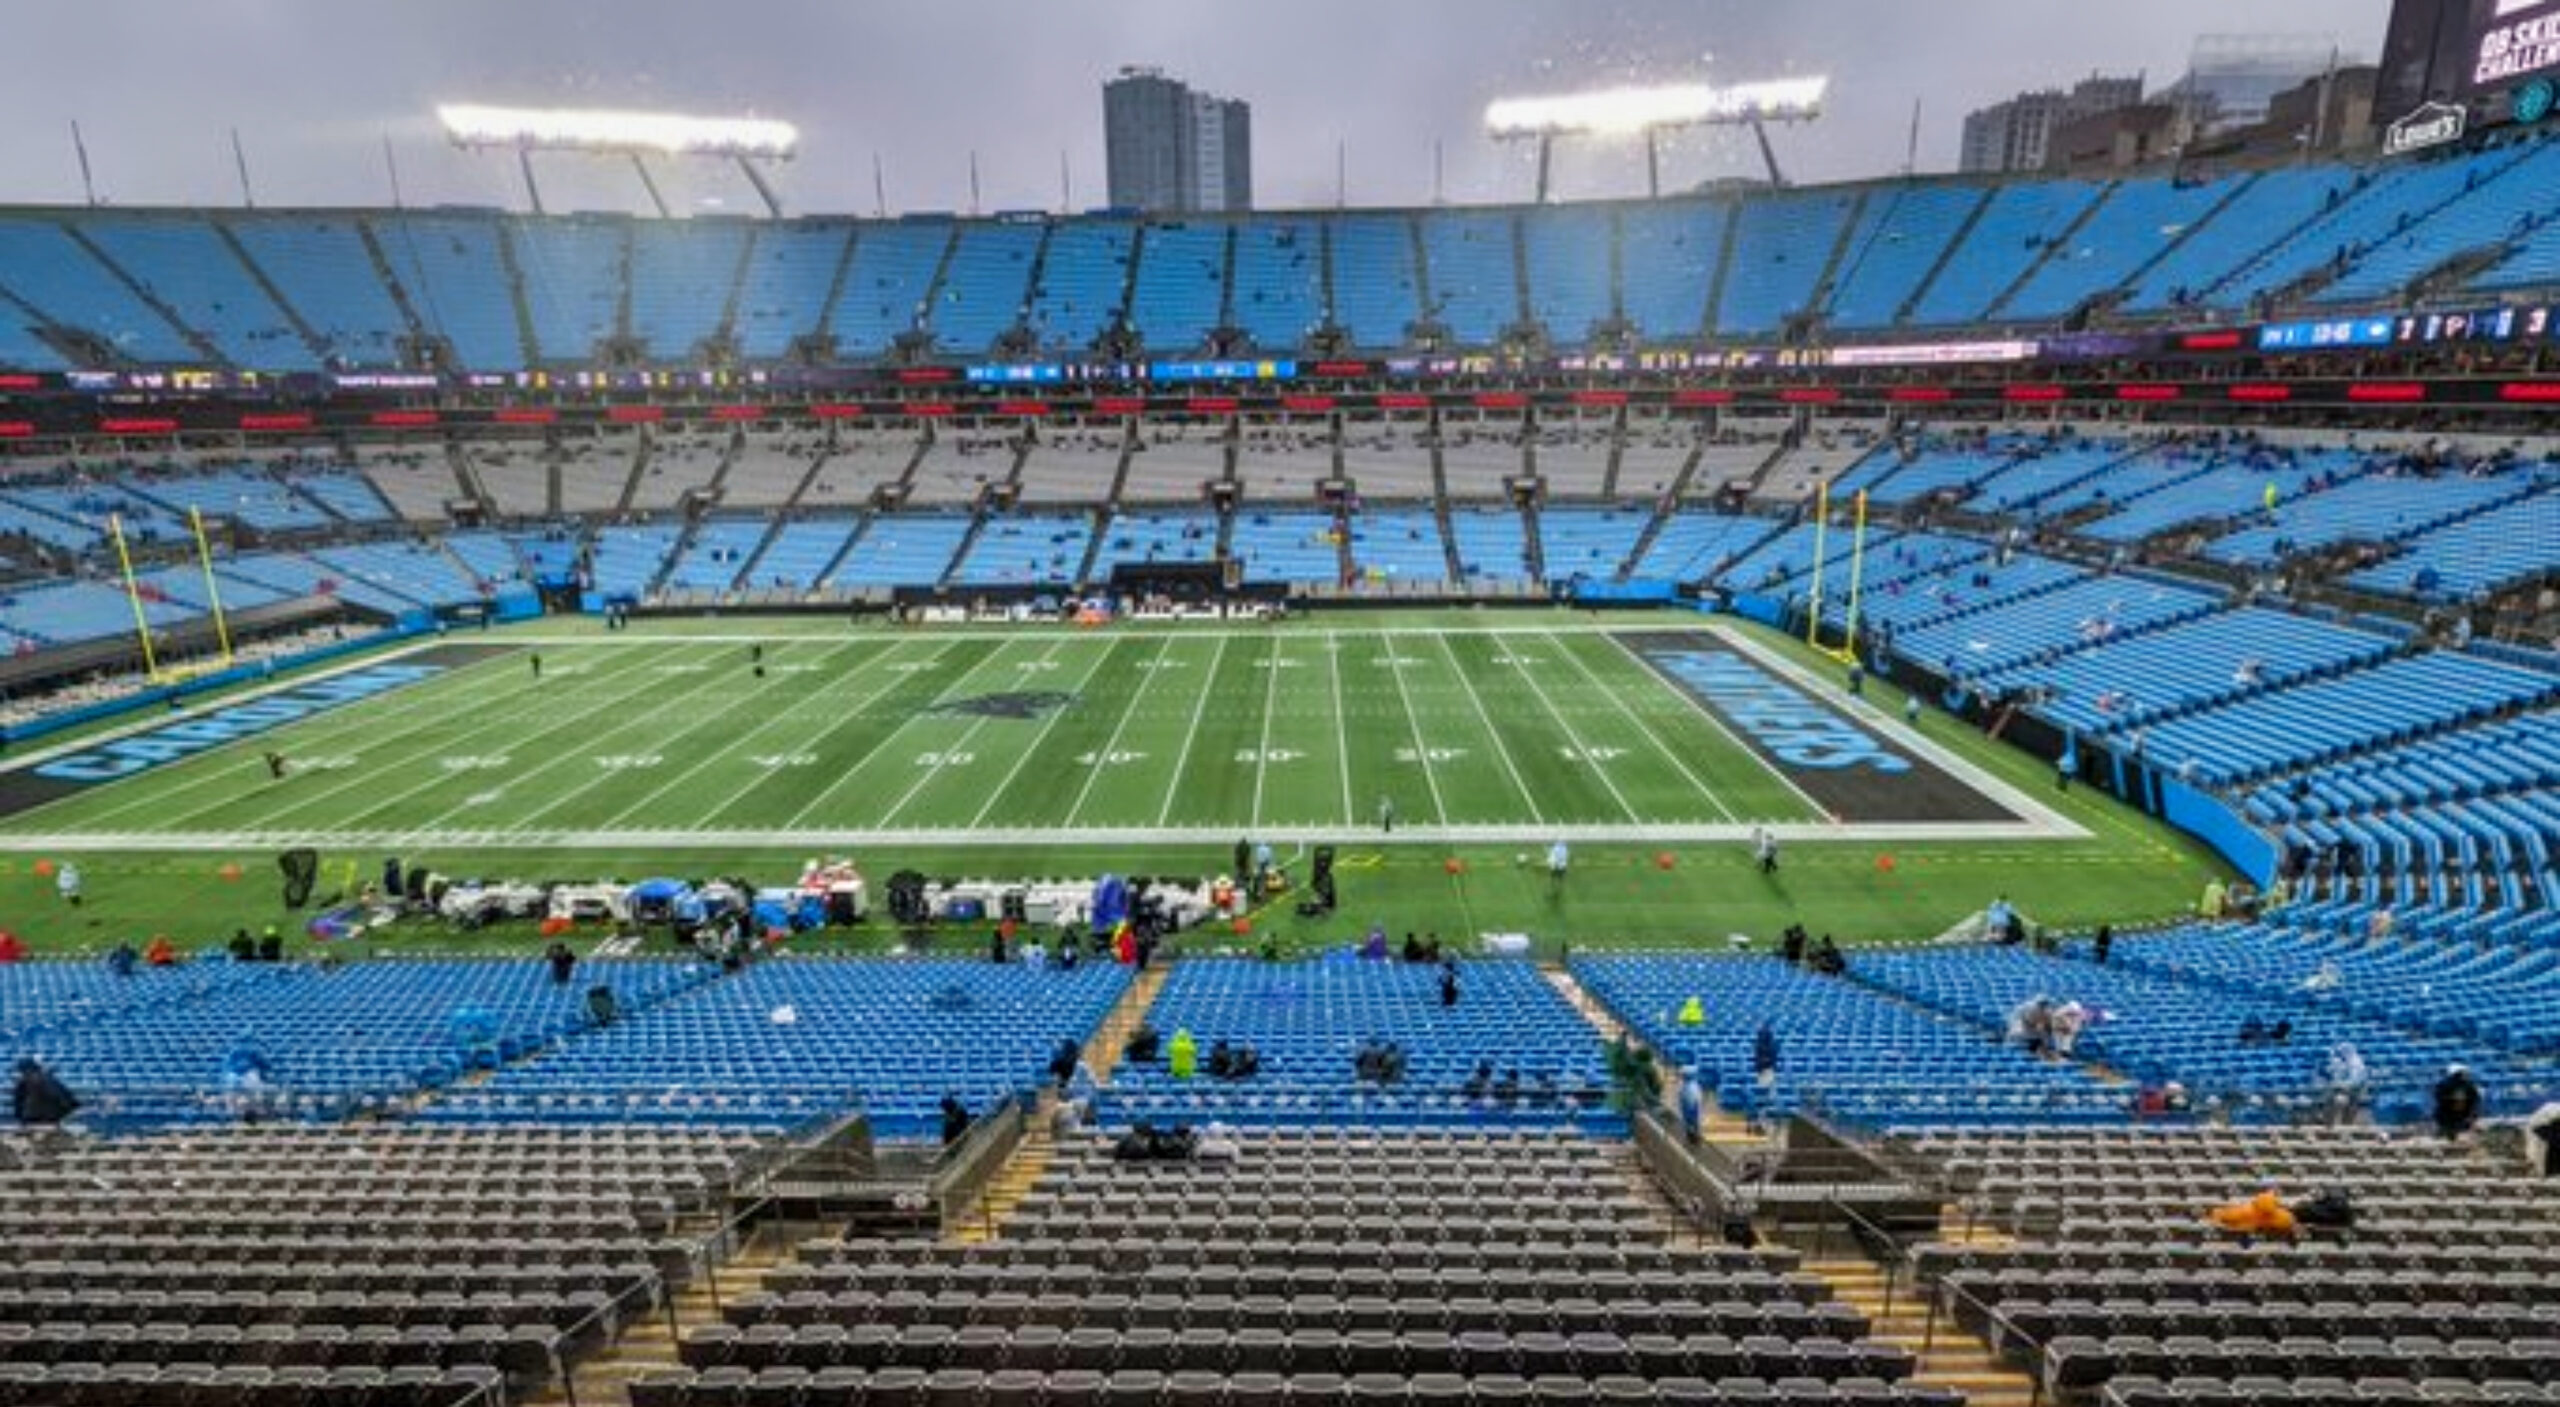 Panthers' Stadium Was Almost Empty At Kickoff vs. Falcons